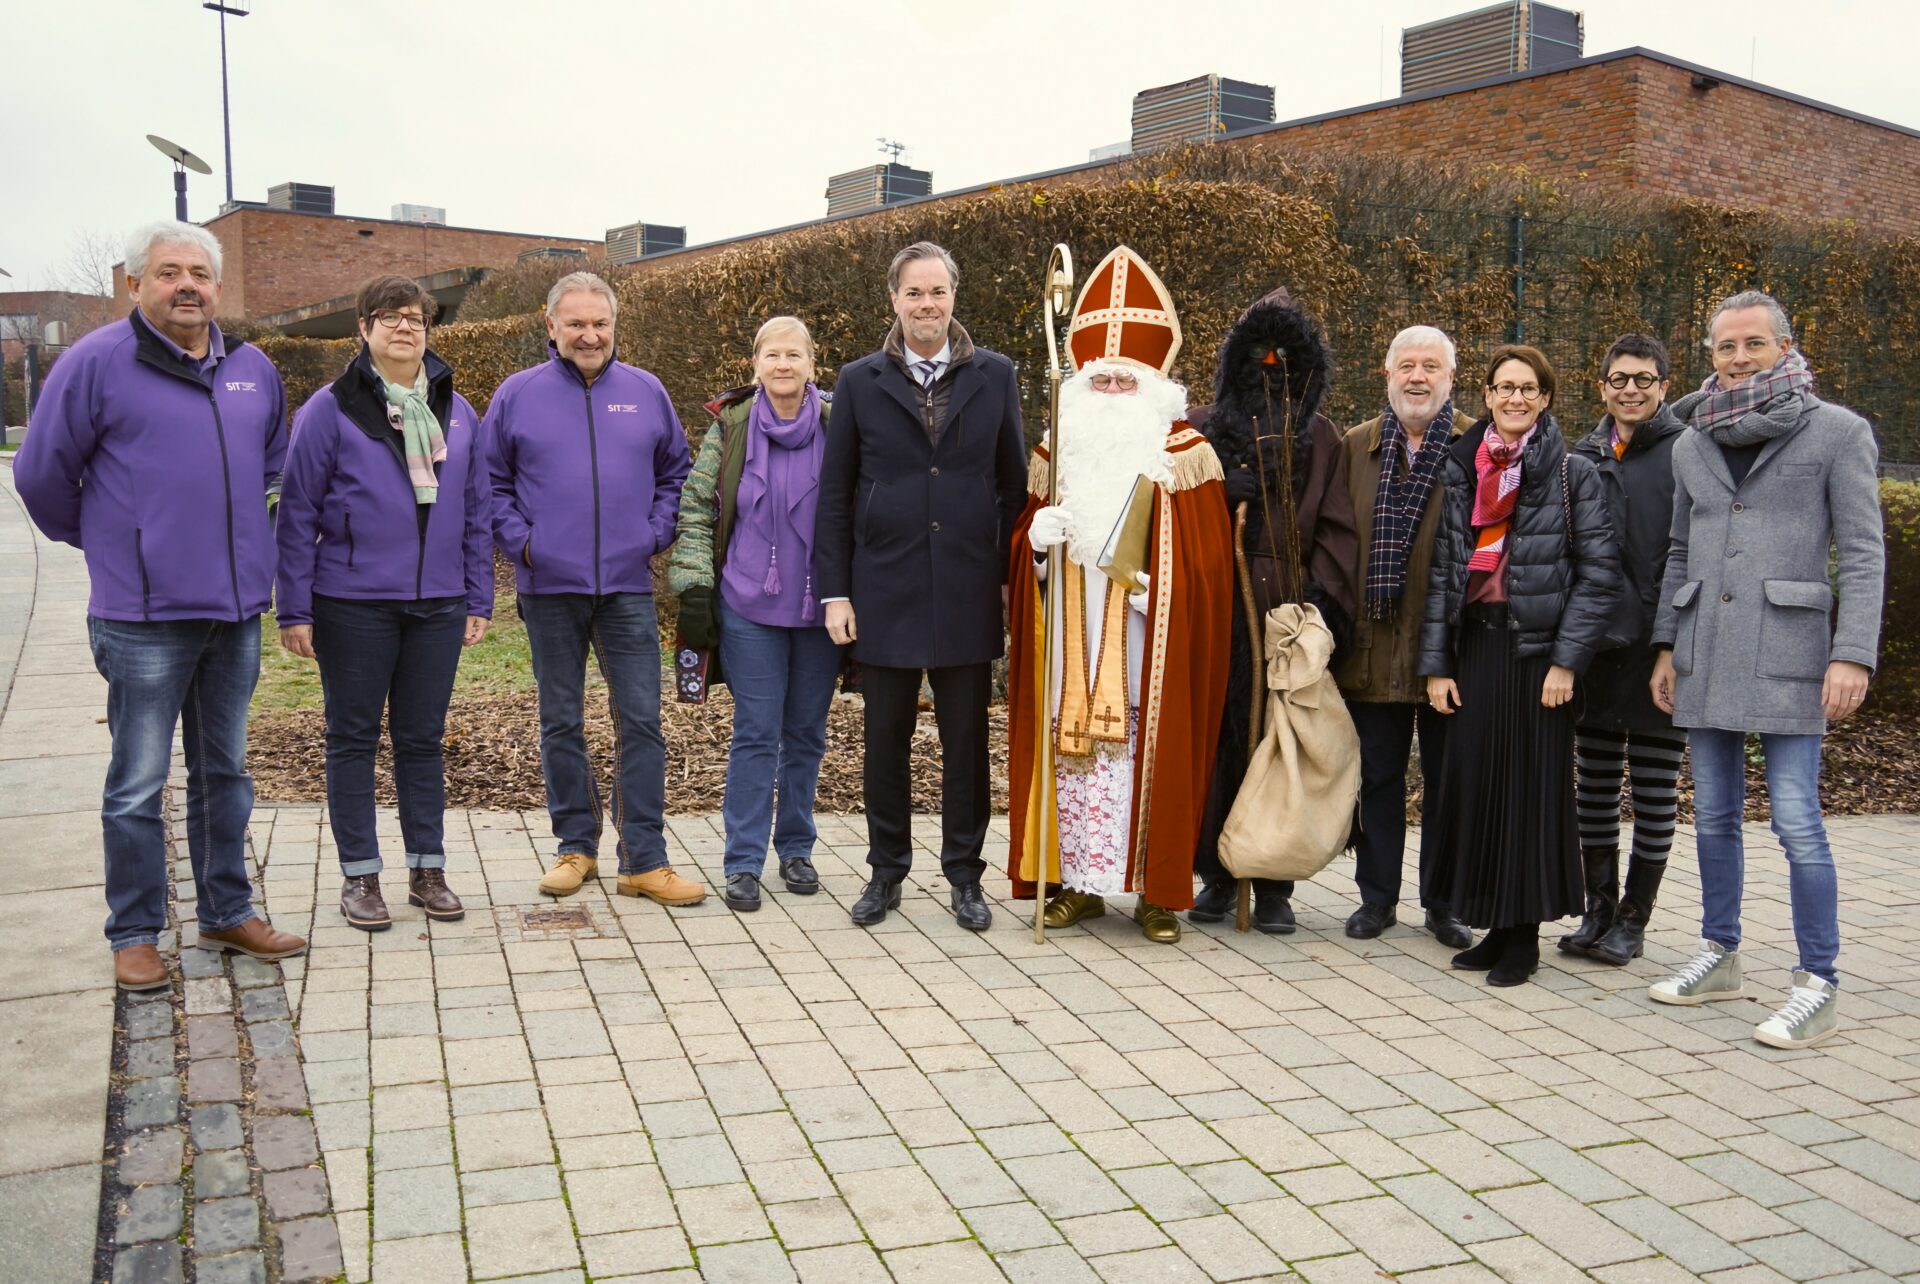 St. Nicholas paid a visit to the Fundamental Schools of Mamer and Capellen